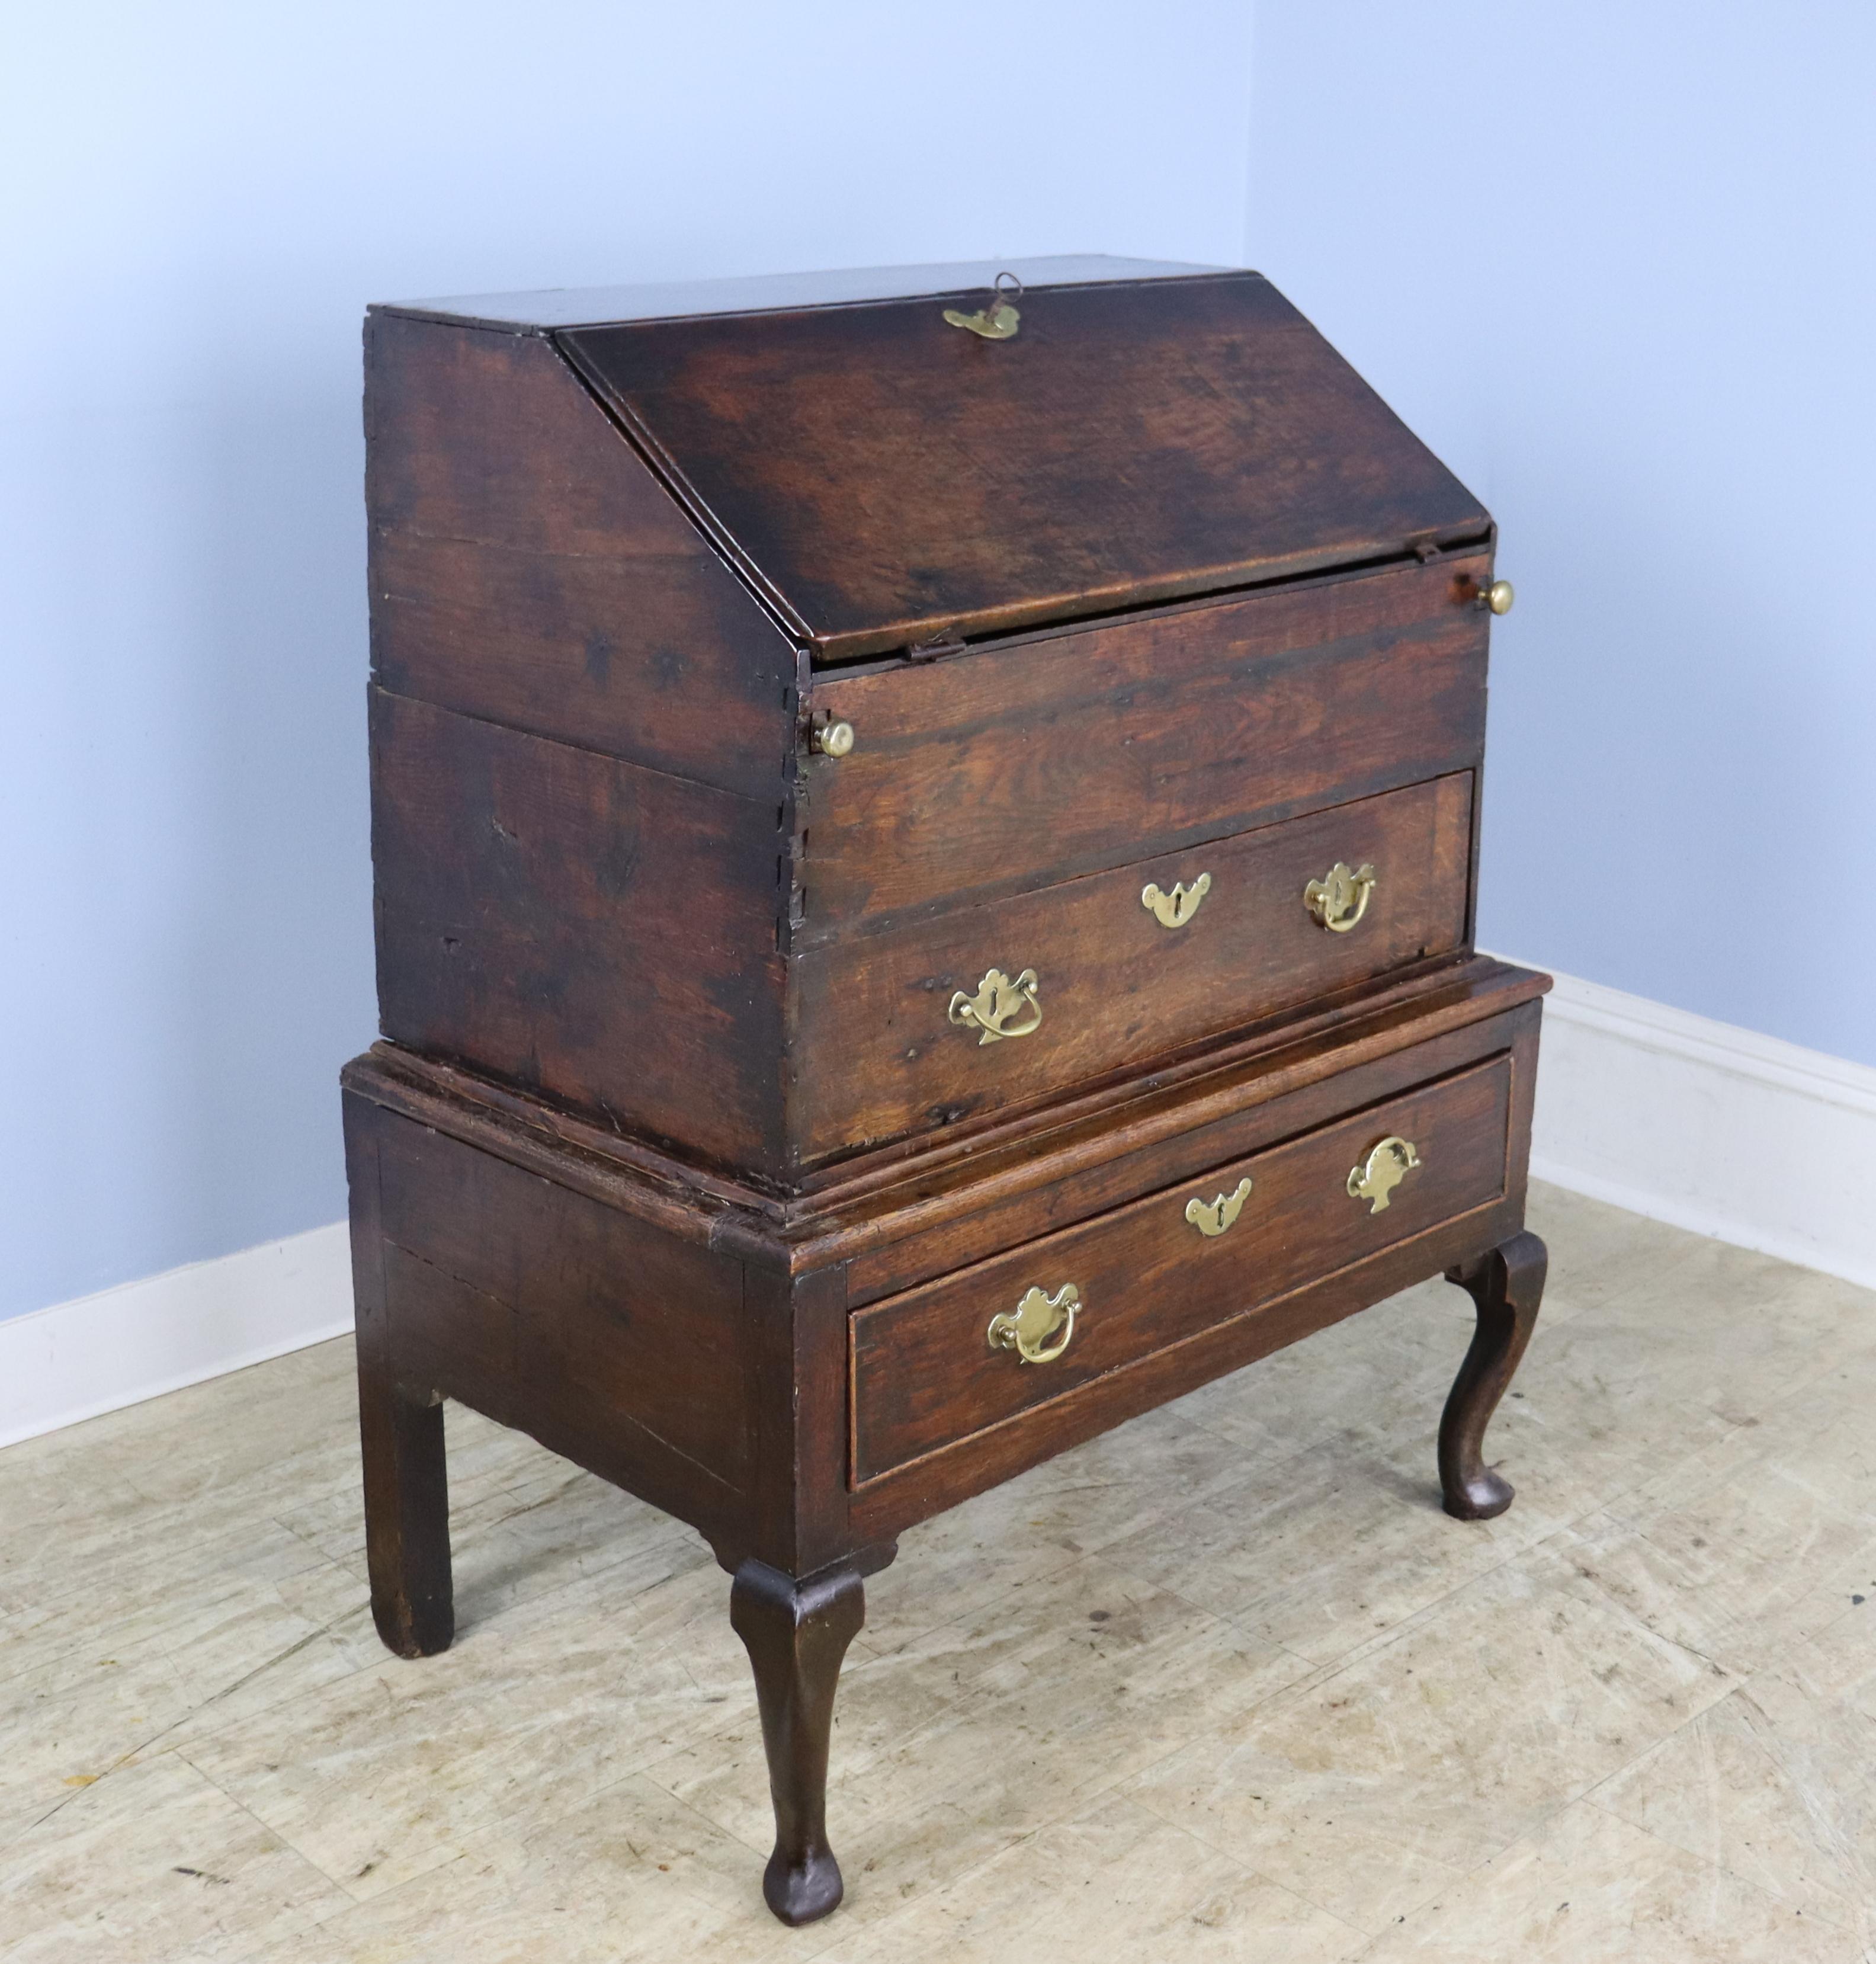 A rare example of 17th Century period furniture, this wonderful oak clerk's desk is in very fine preserved condition.  The original key to the drop down writing surface works well, and the many drawers open and close easily.  Shown in thumbnails are